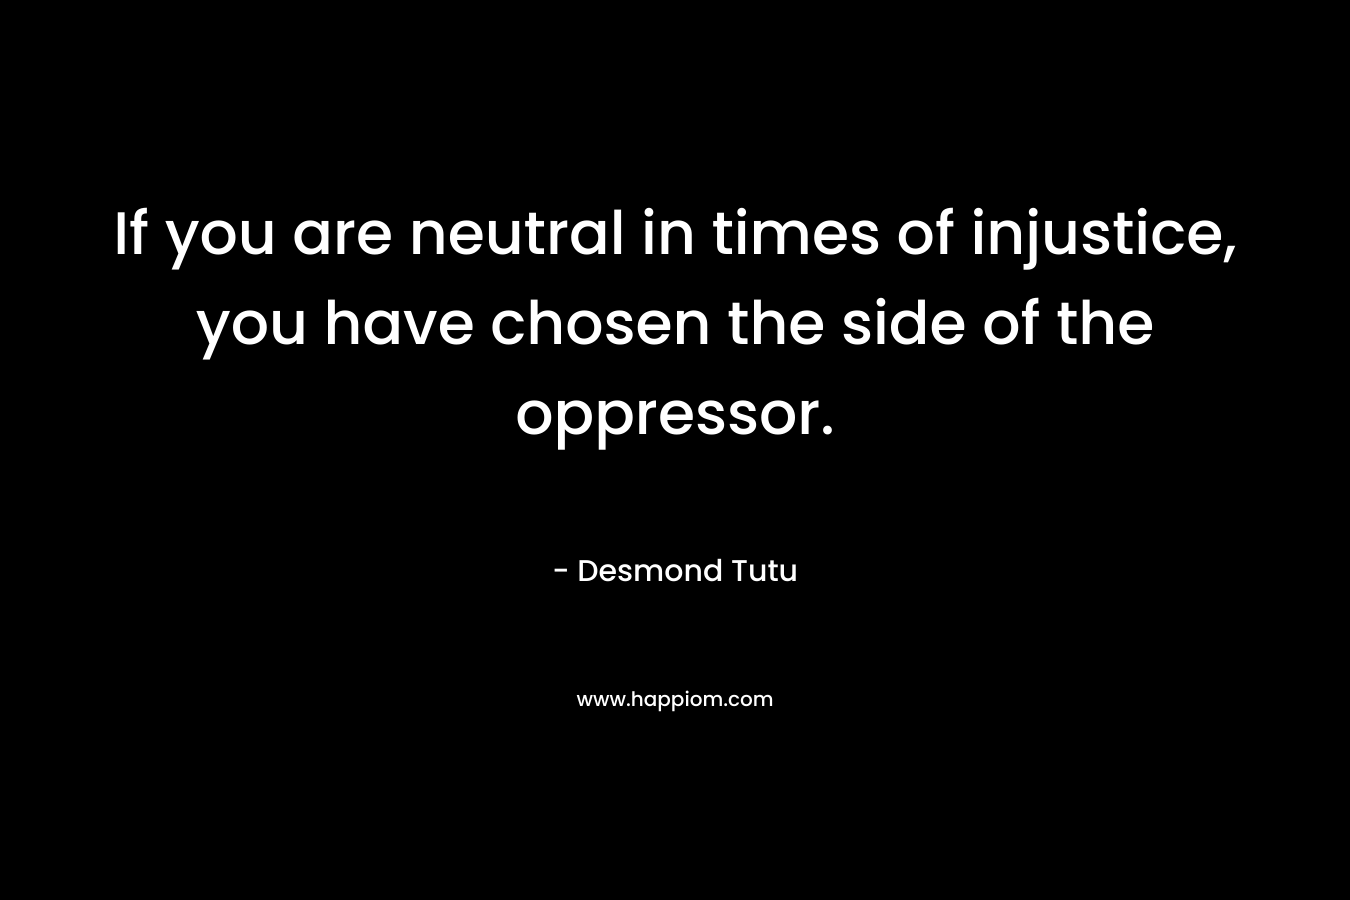 If you are neutral in times of injustice, you have chosen the side of the oppressor.